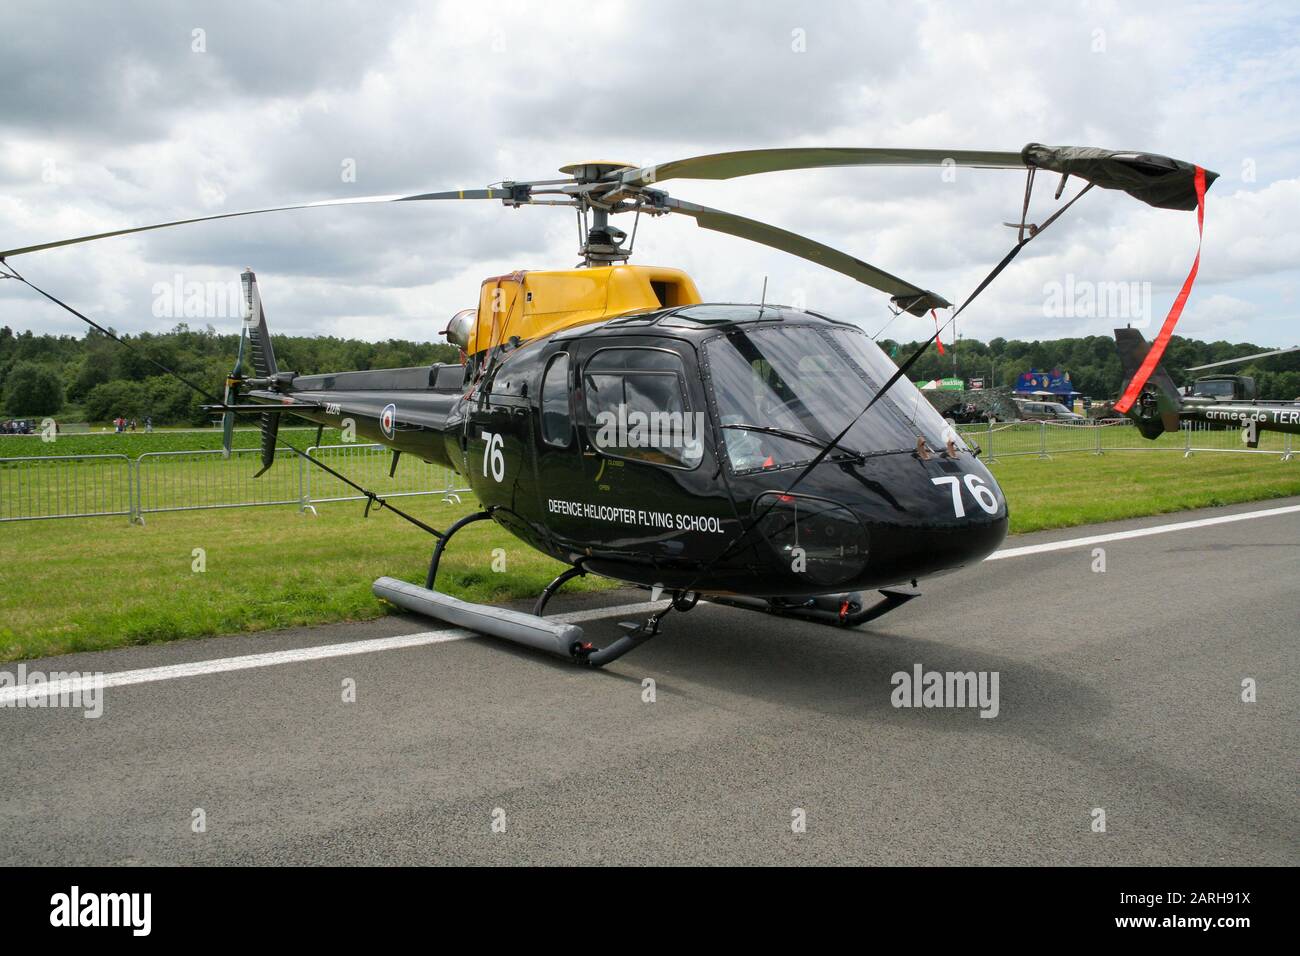 FLORENNES, BELGIUM - JUL 6, 2008: British Royal Air Force (RAF) Eurocopter AS-350BB Squirrel HT.1 helicopter from the Defence Helicopter Flying School Stock Photo